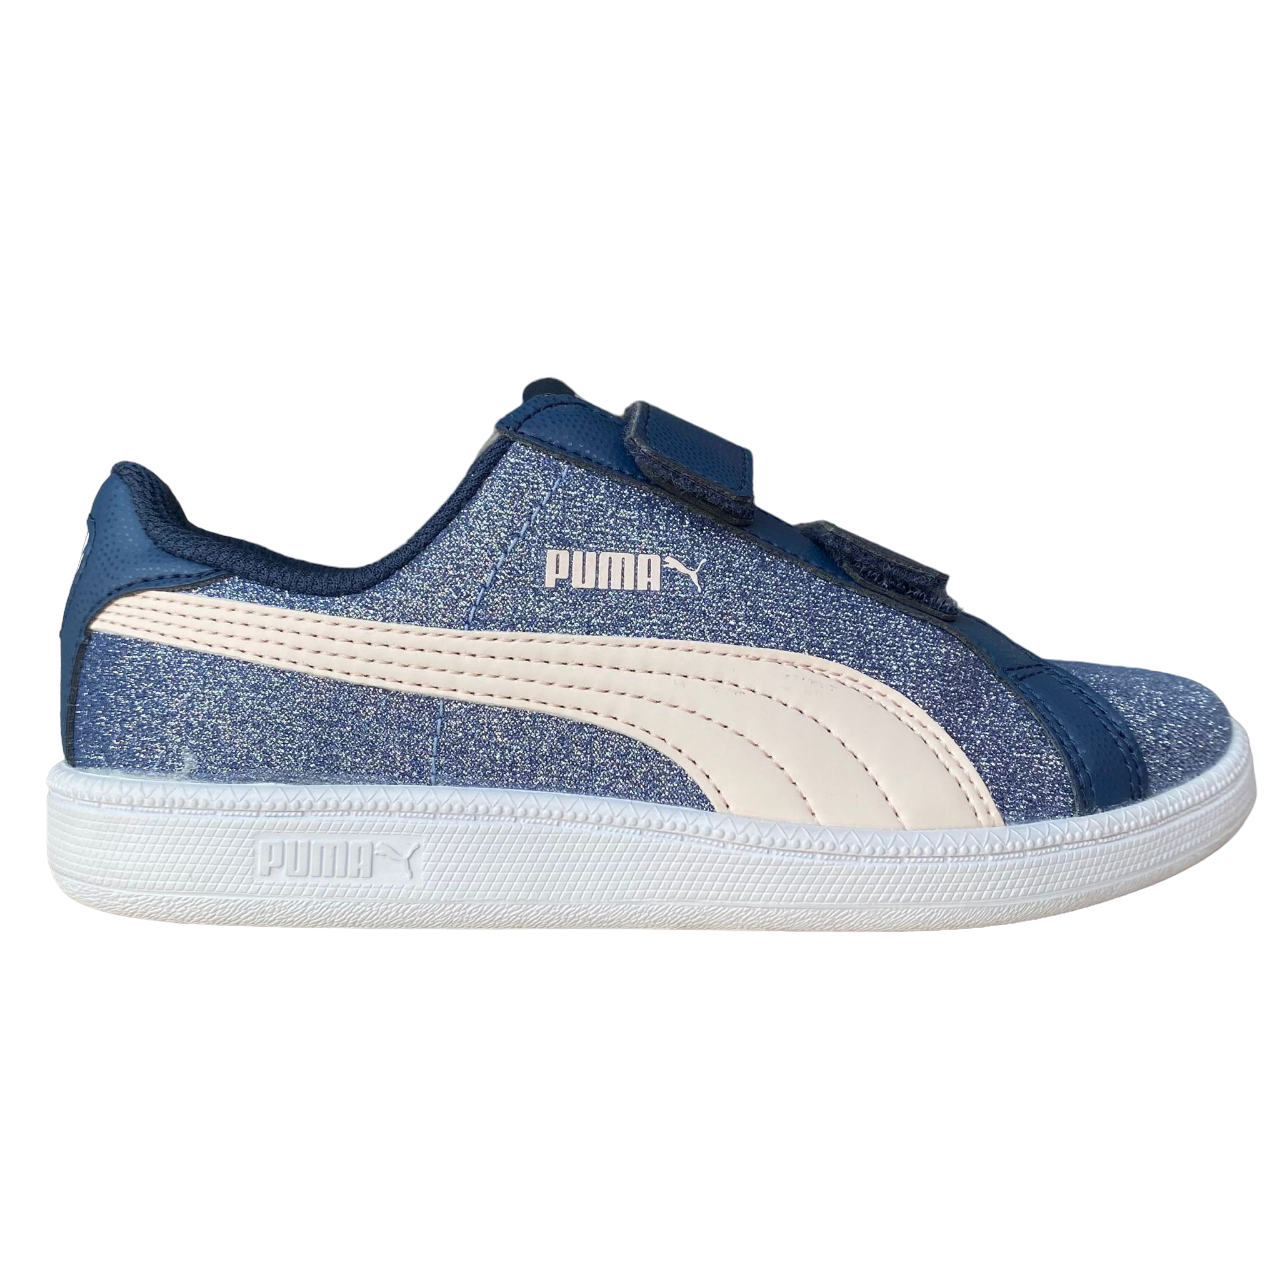 Puma girl&#39;s sneakers shoe with Smash glitter tear V PS 362956 04 blue